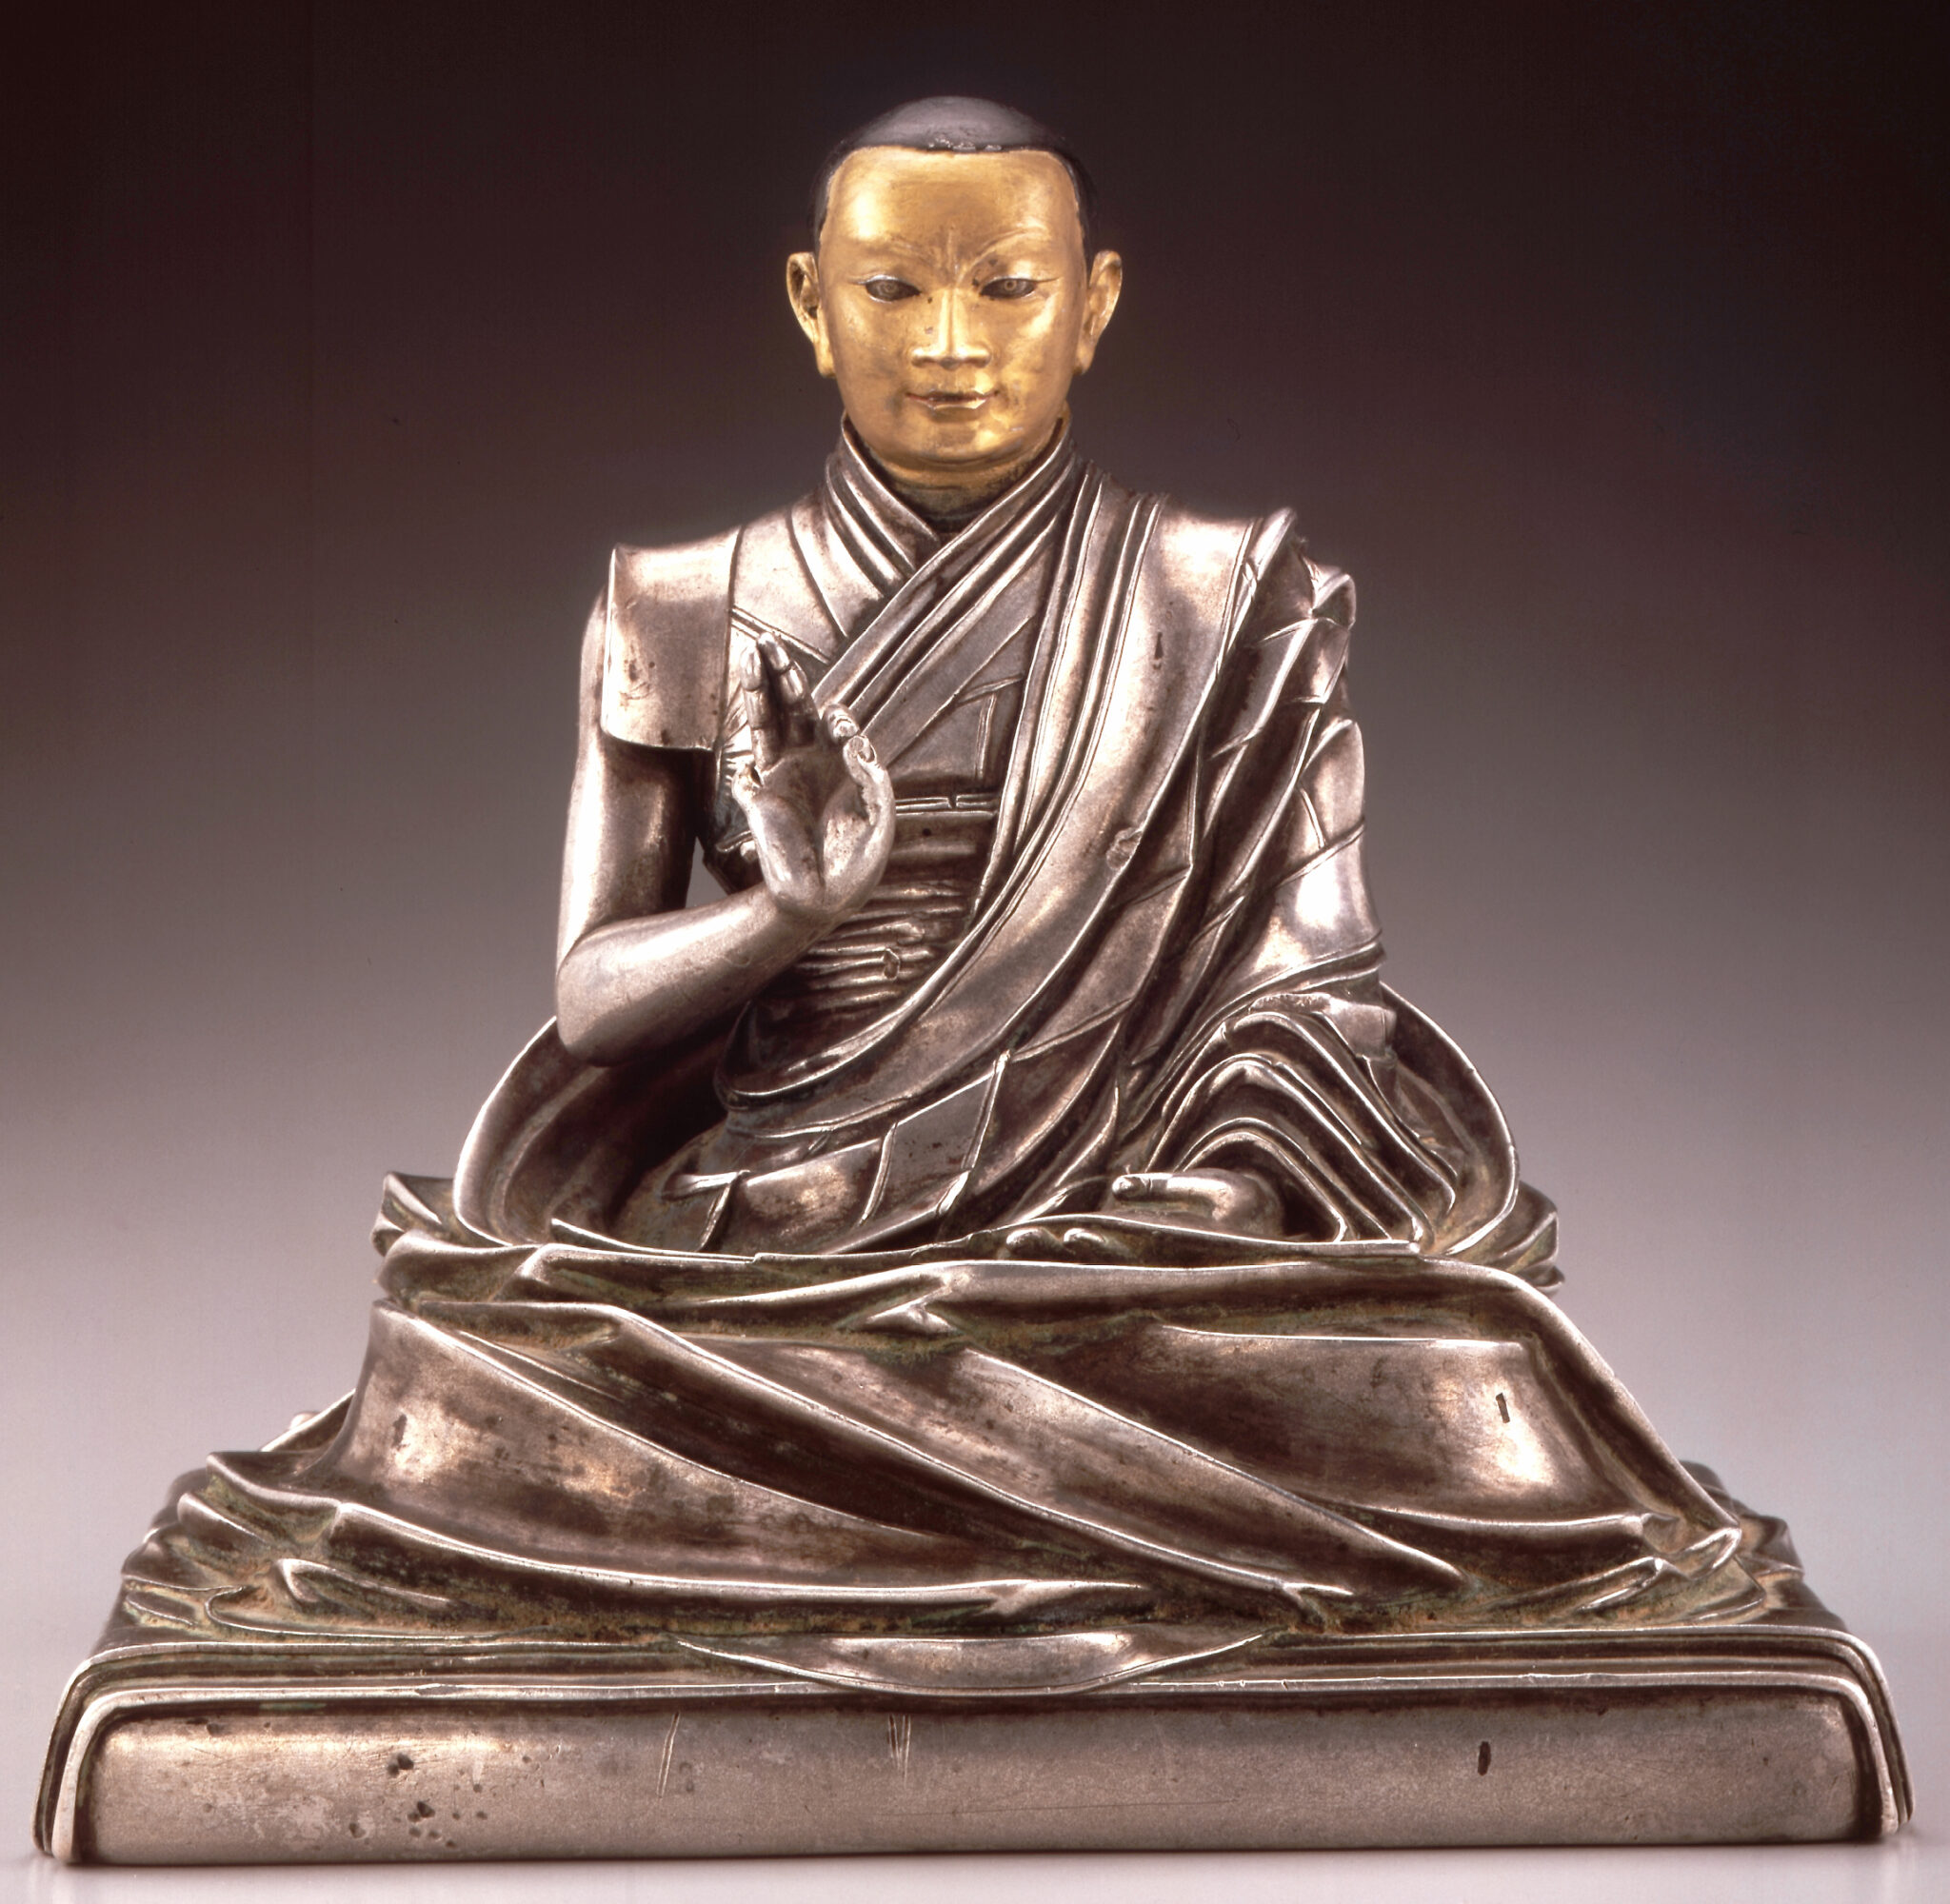 Golden-faced silver statuette depicting seated lama with left hand raised in mudra wearing finely modeled robe